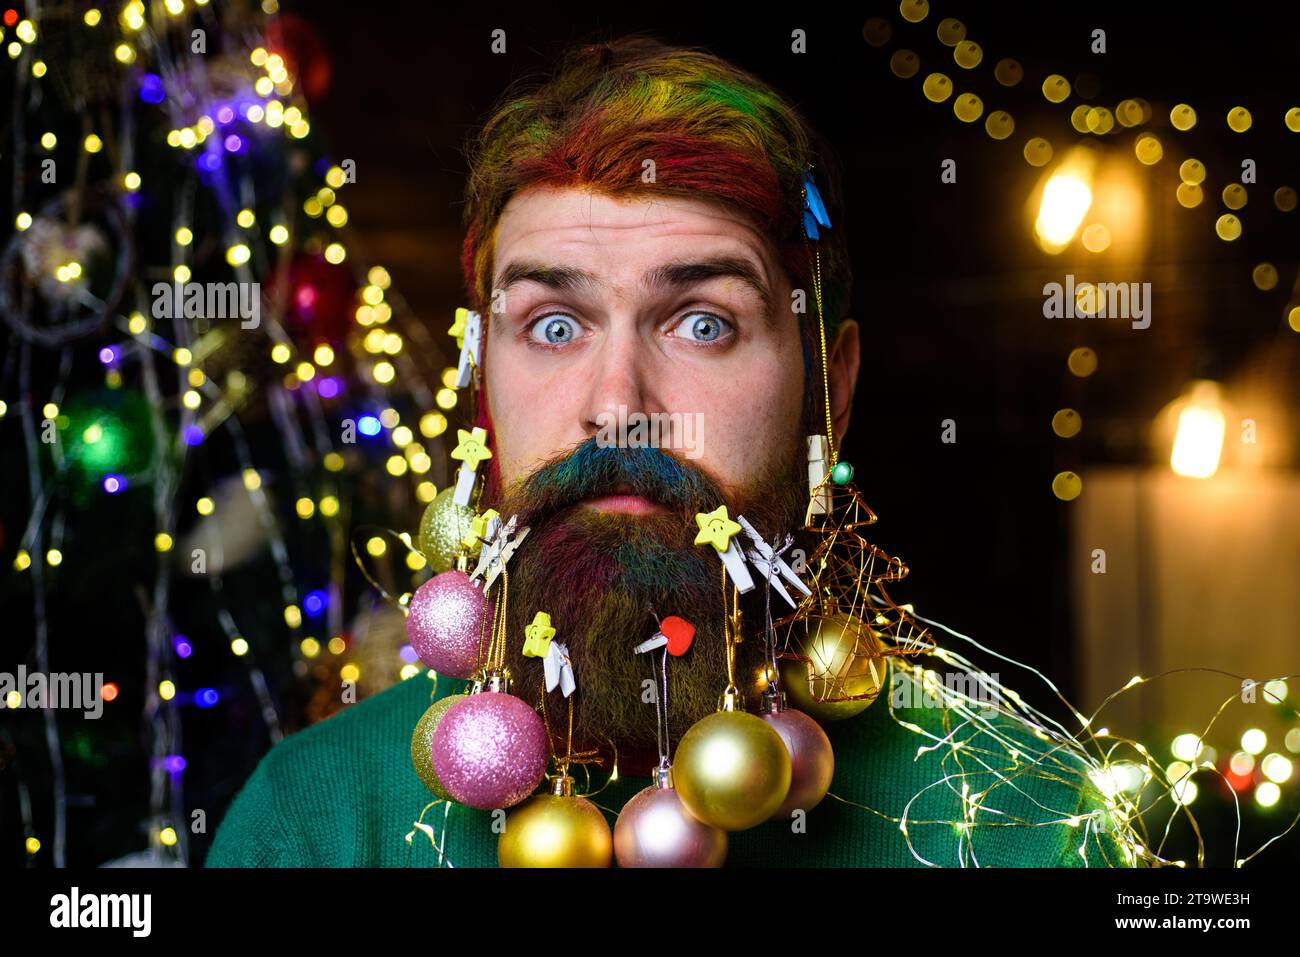 Christmas barbershop advertising. Bearded guy with decorated beard ready for Christmas or New Year party. Surprised man with colorful hair and beard Stock Photo